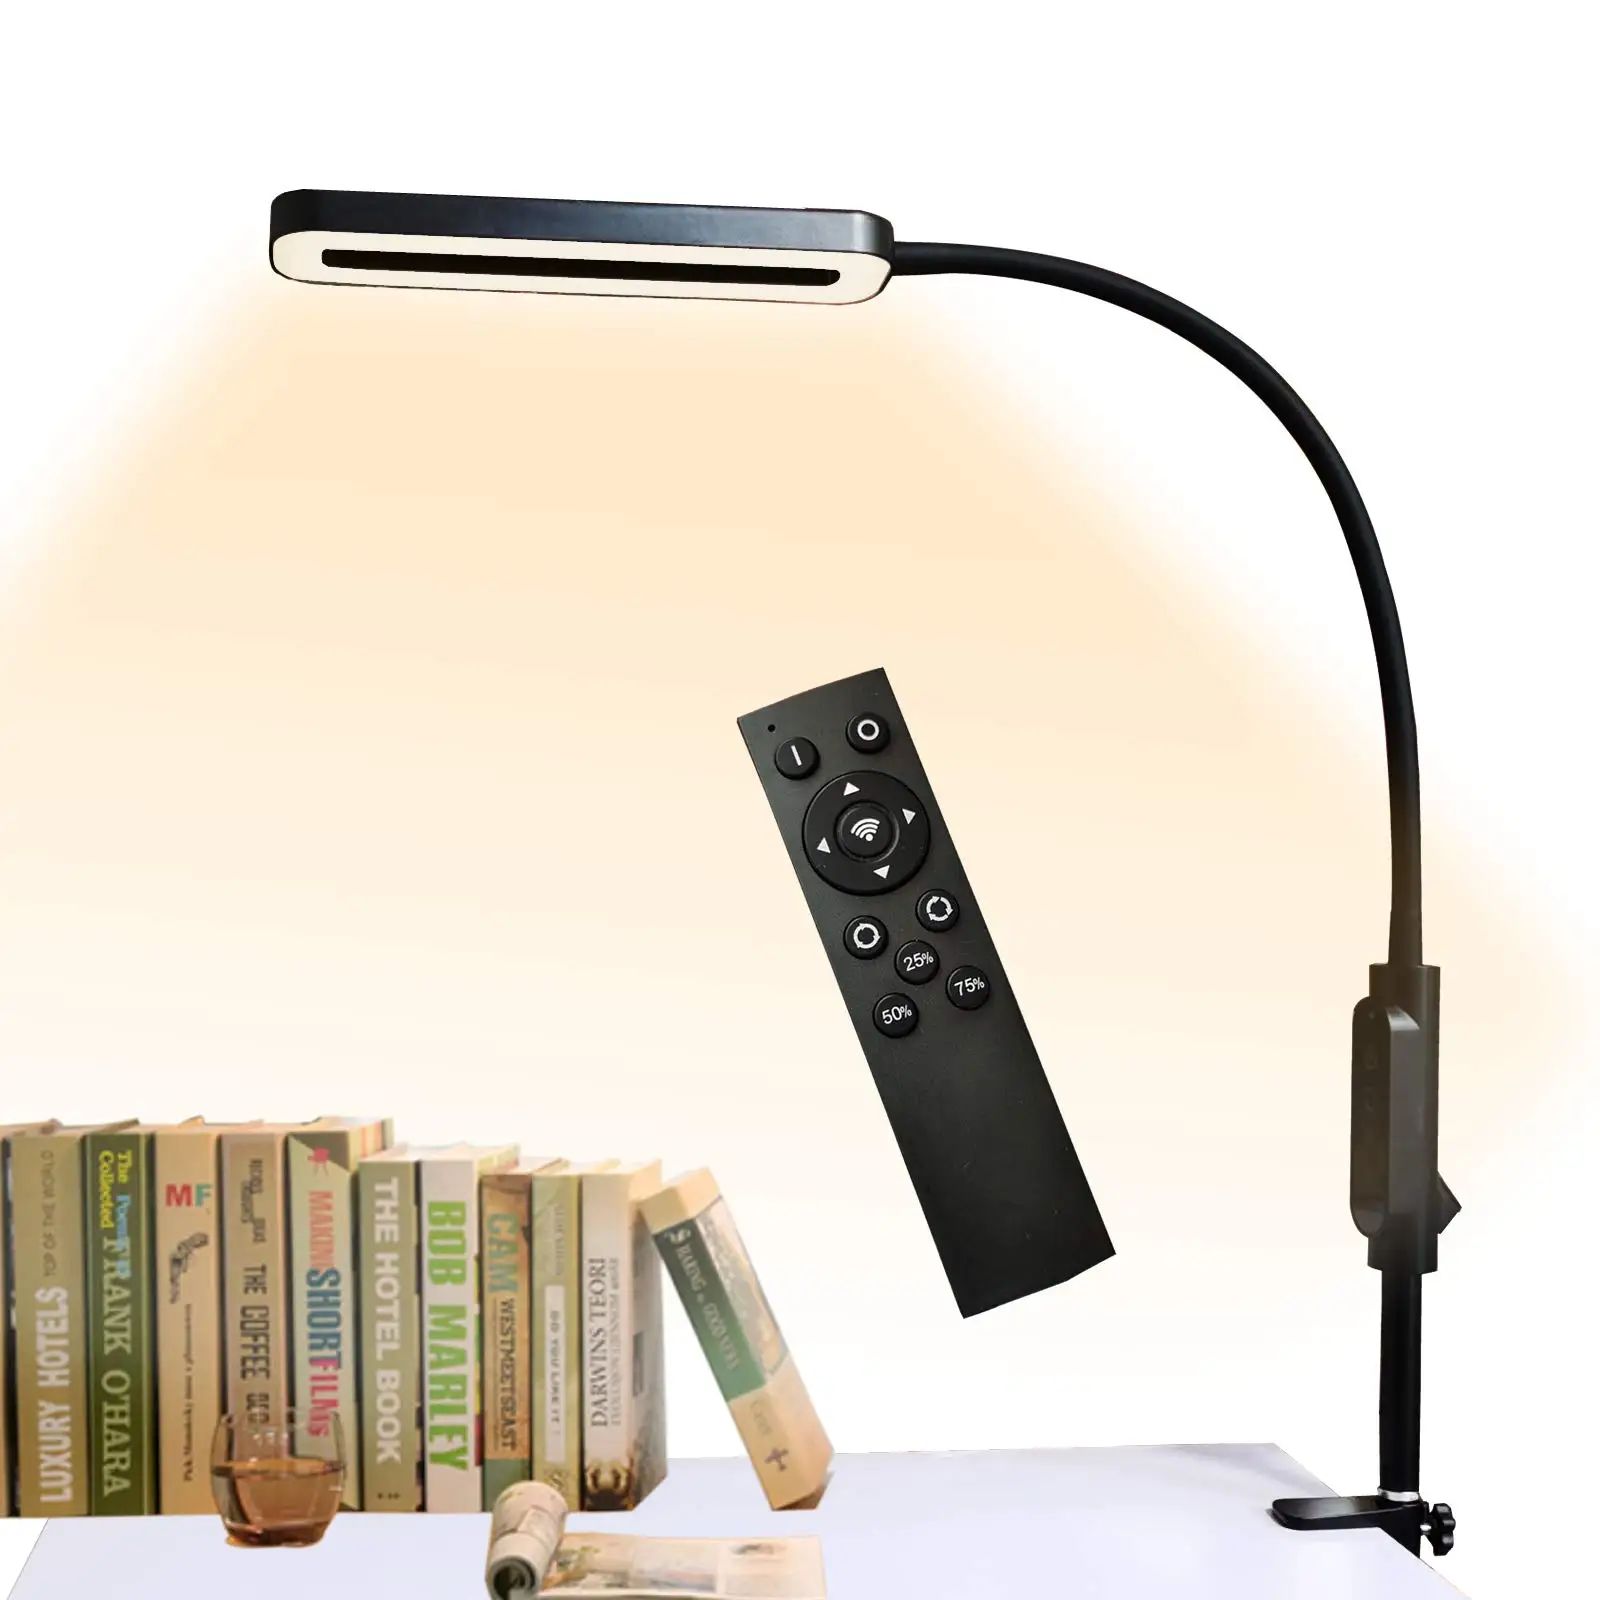 

LED Desk Lamp with Flexible Gooseneck Table Clamp Dimmable 10-100% Brightness 3 Color Modes For Study Reading Work Office